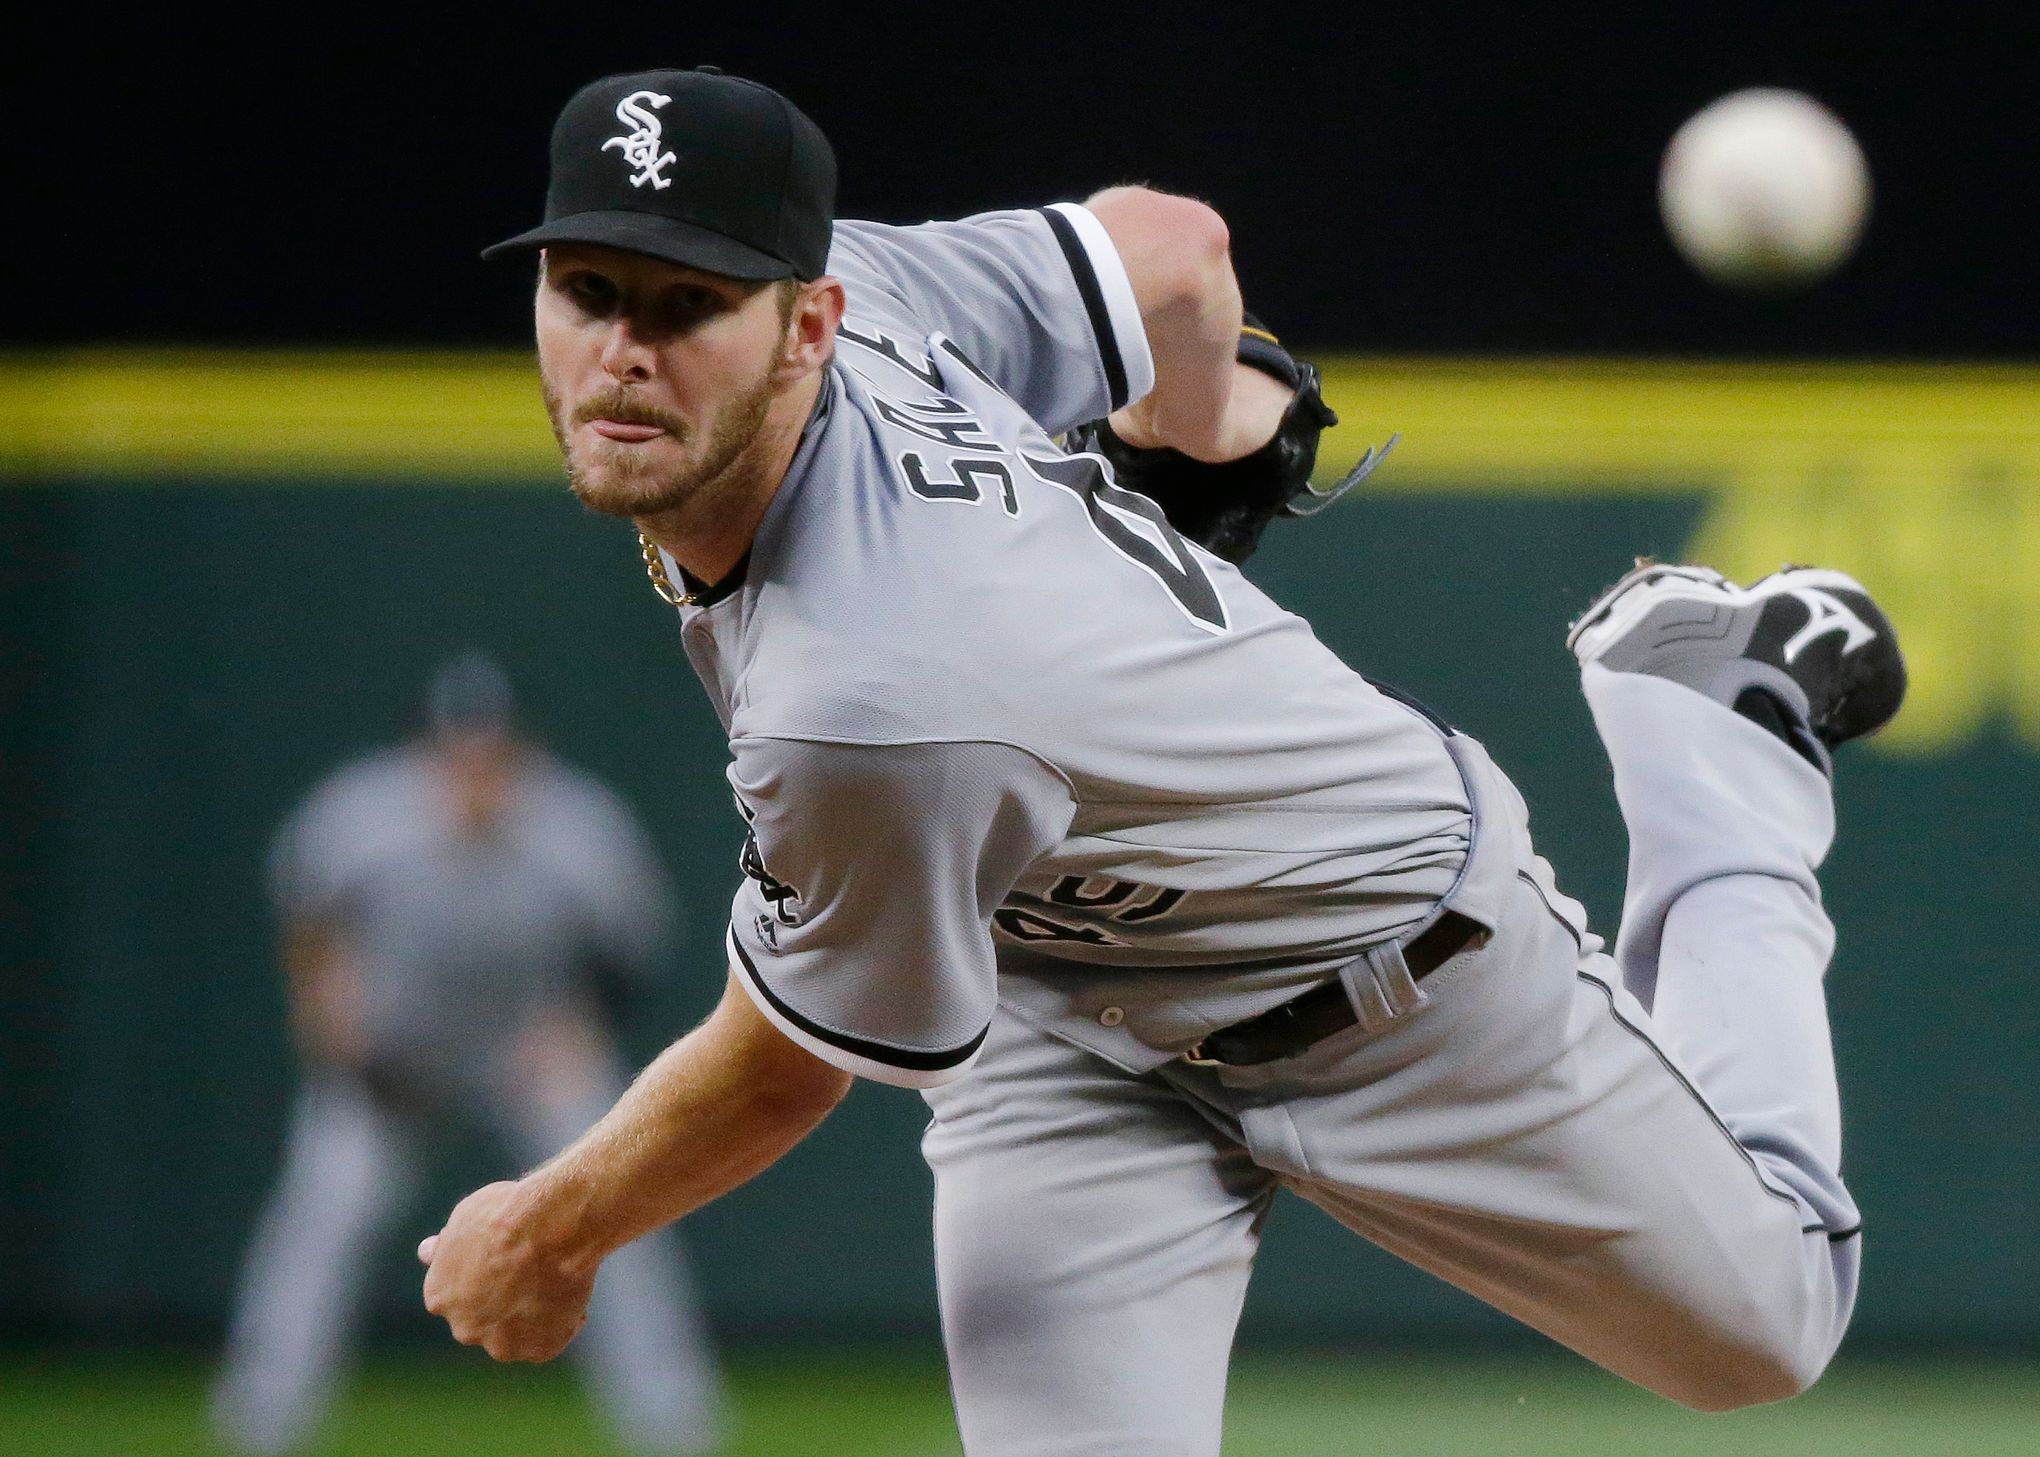 Sox Ace Chris Sale Suspended 5 Games for Clubhouse Cut-Up Incident